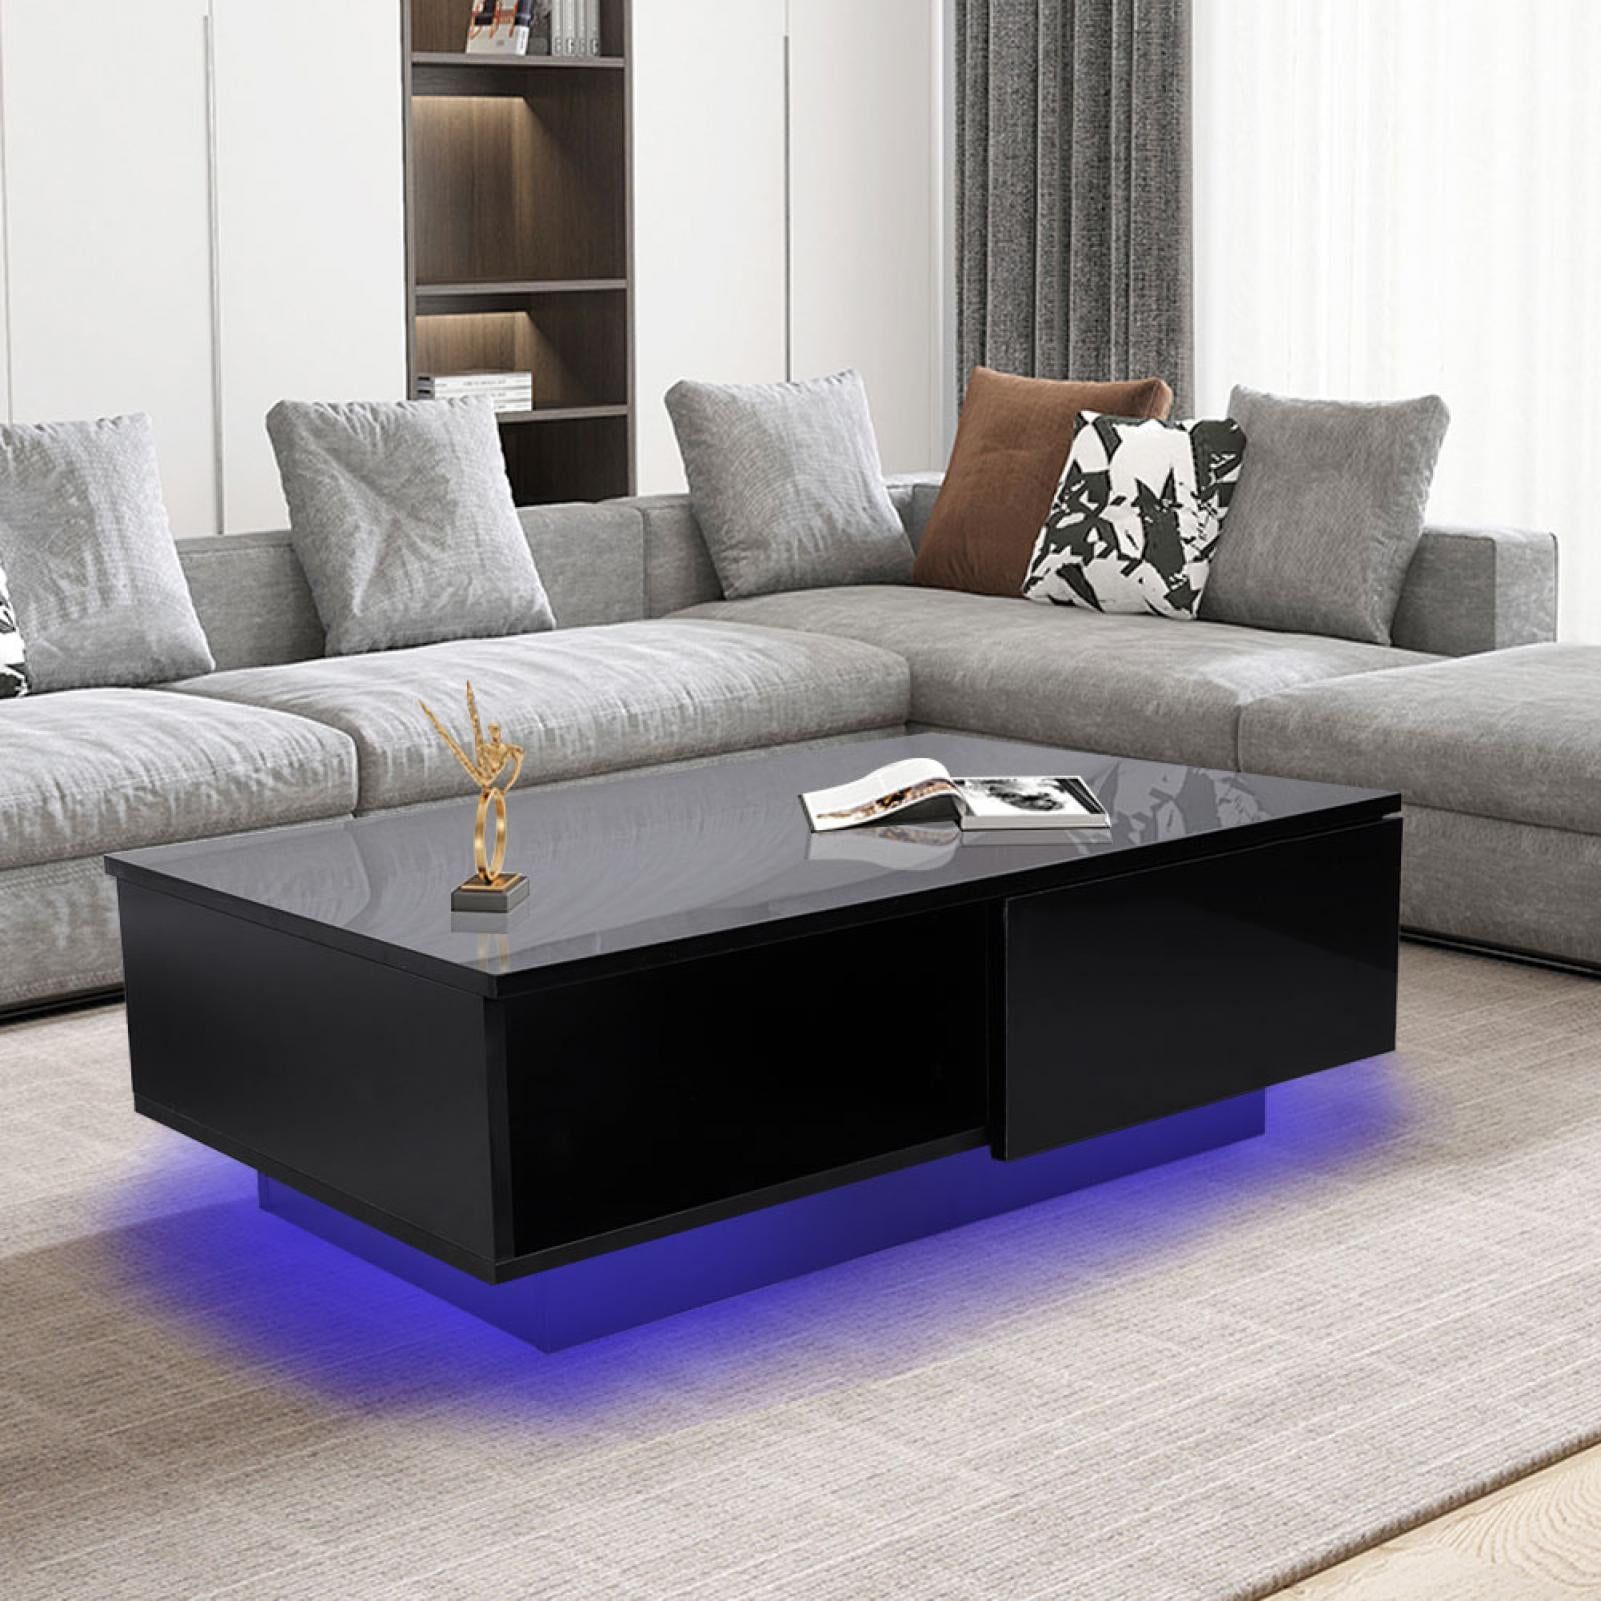 Ebtools Rectangle Led Coffee Table, Black Modern High Gloss Furniture Inside Rectangular Led Coffee Tables (Gallery 5 of 20)